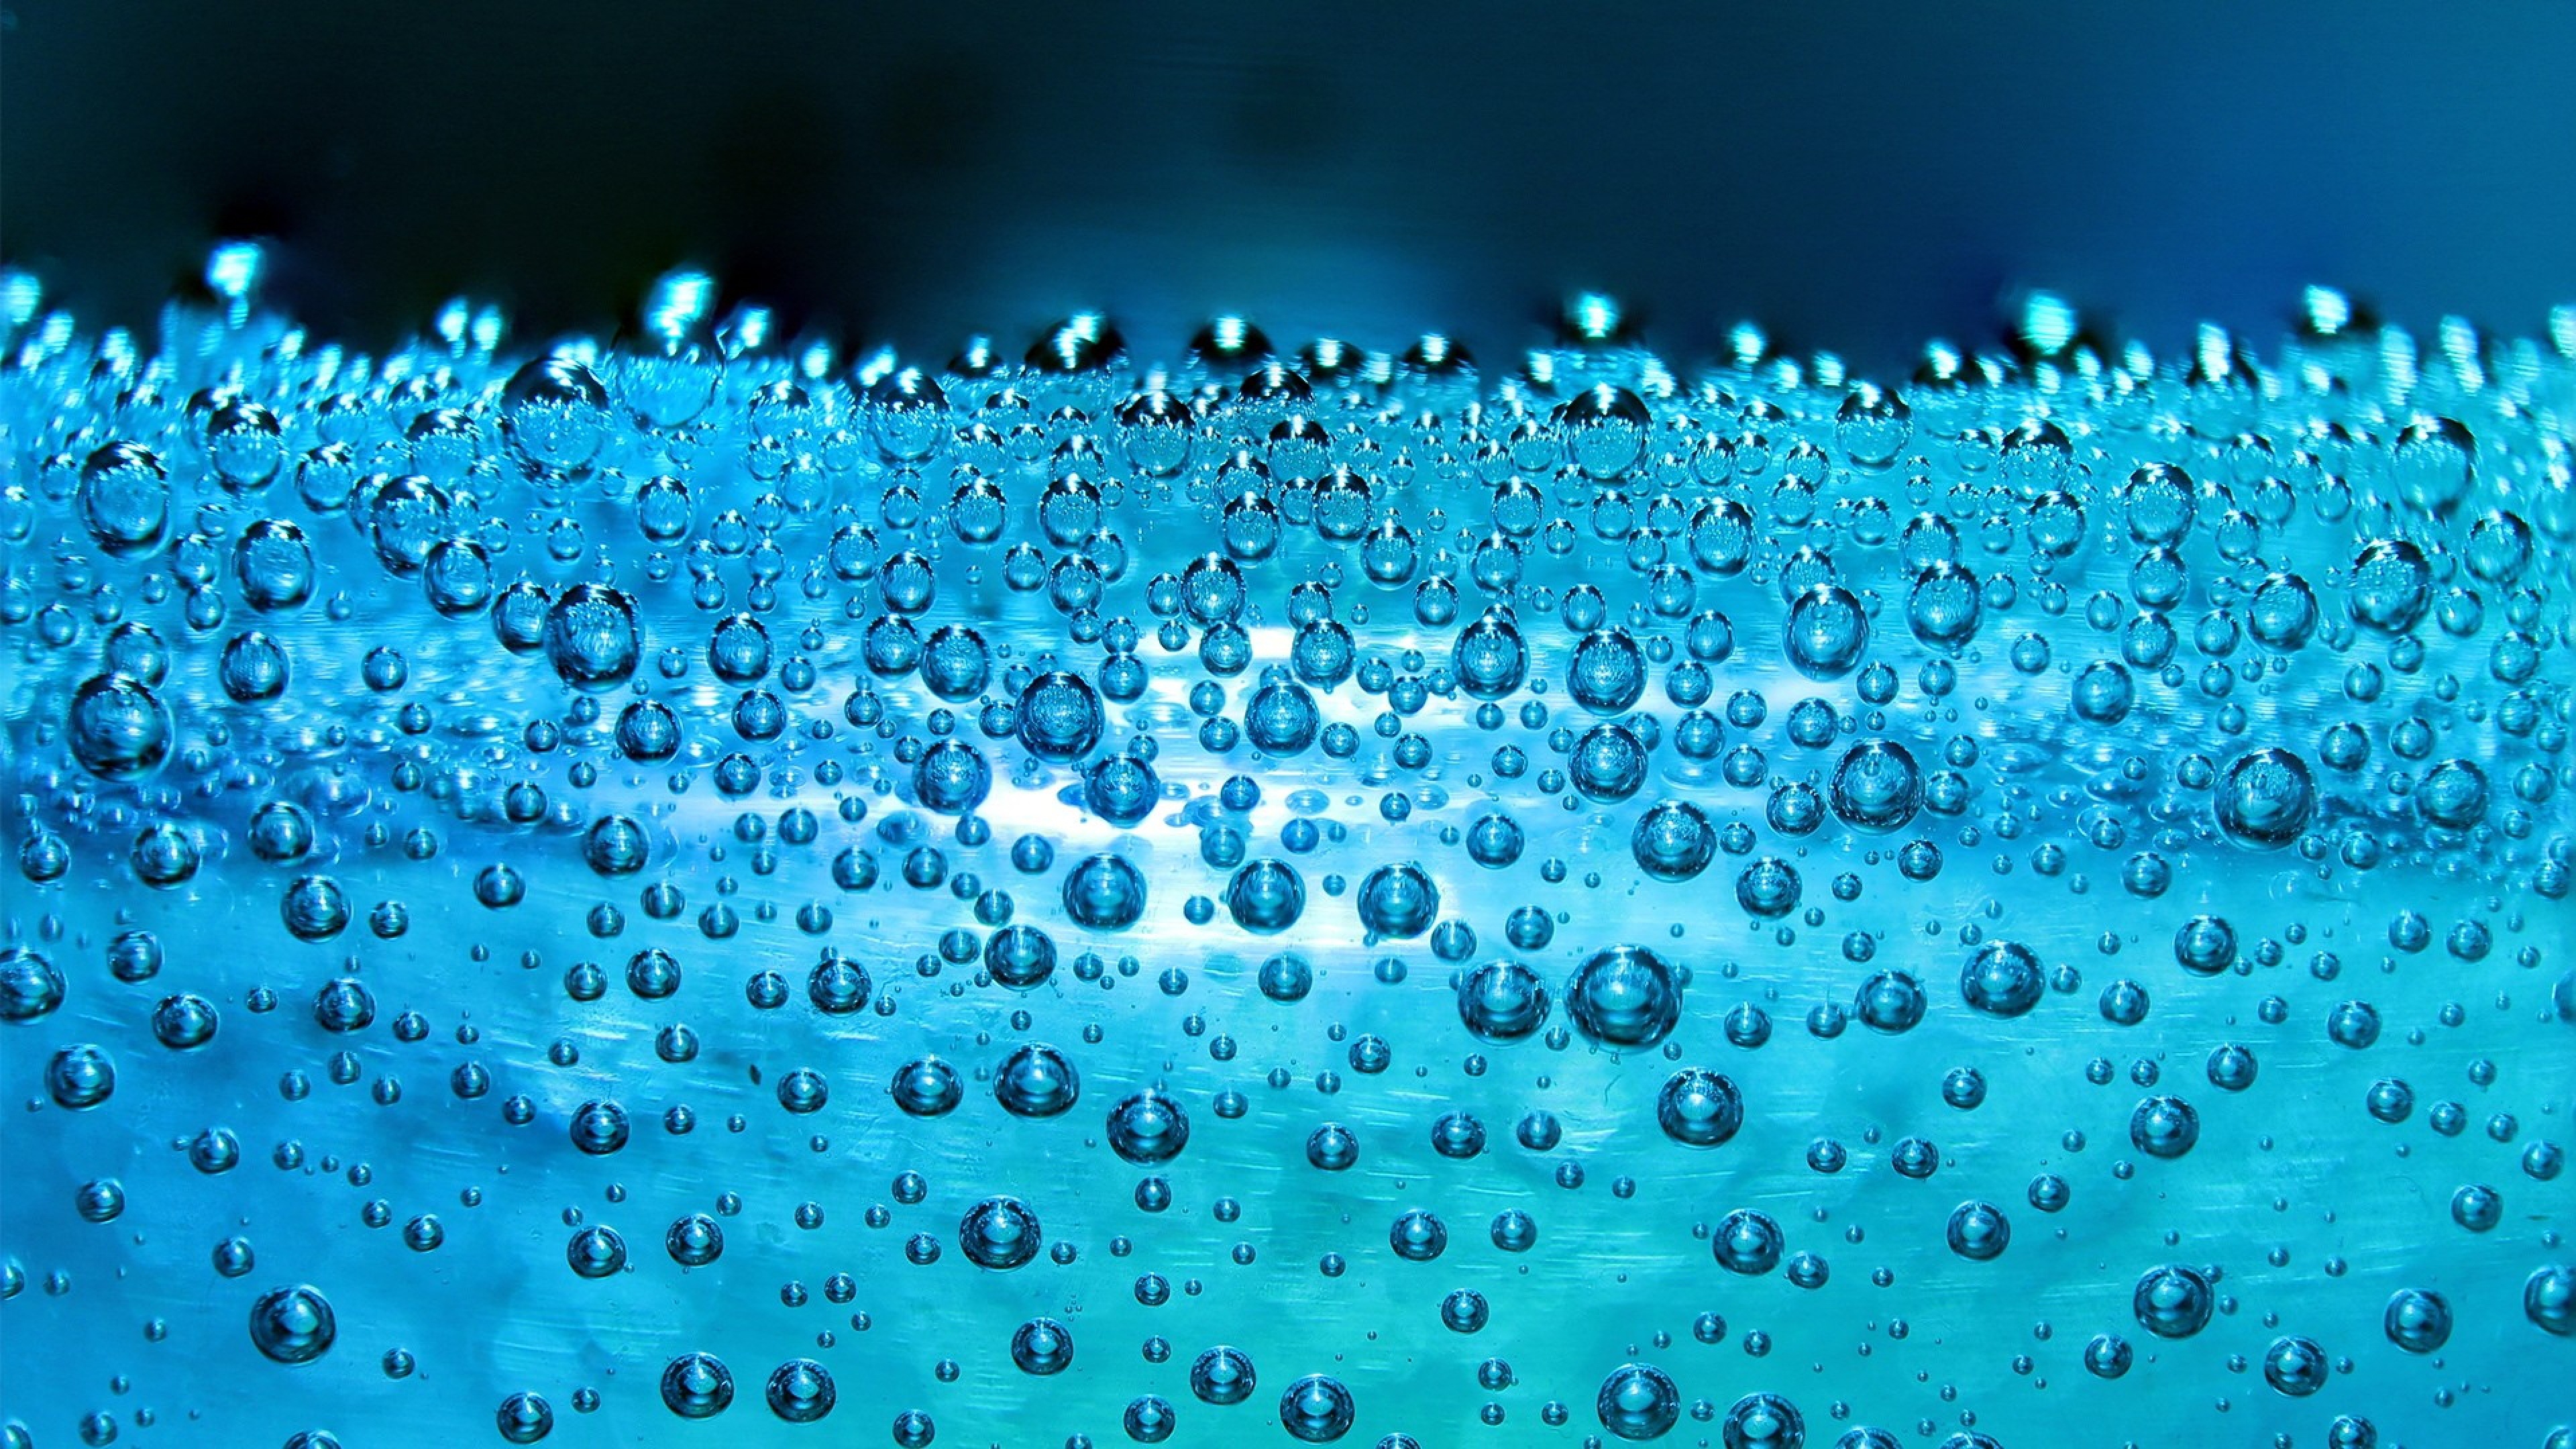 Download Wallpaper 3840x2160 Droplet, Surface, Water, Humidity 4K ...